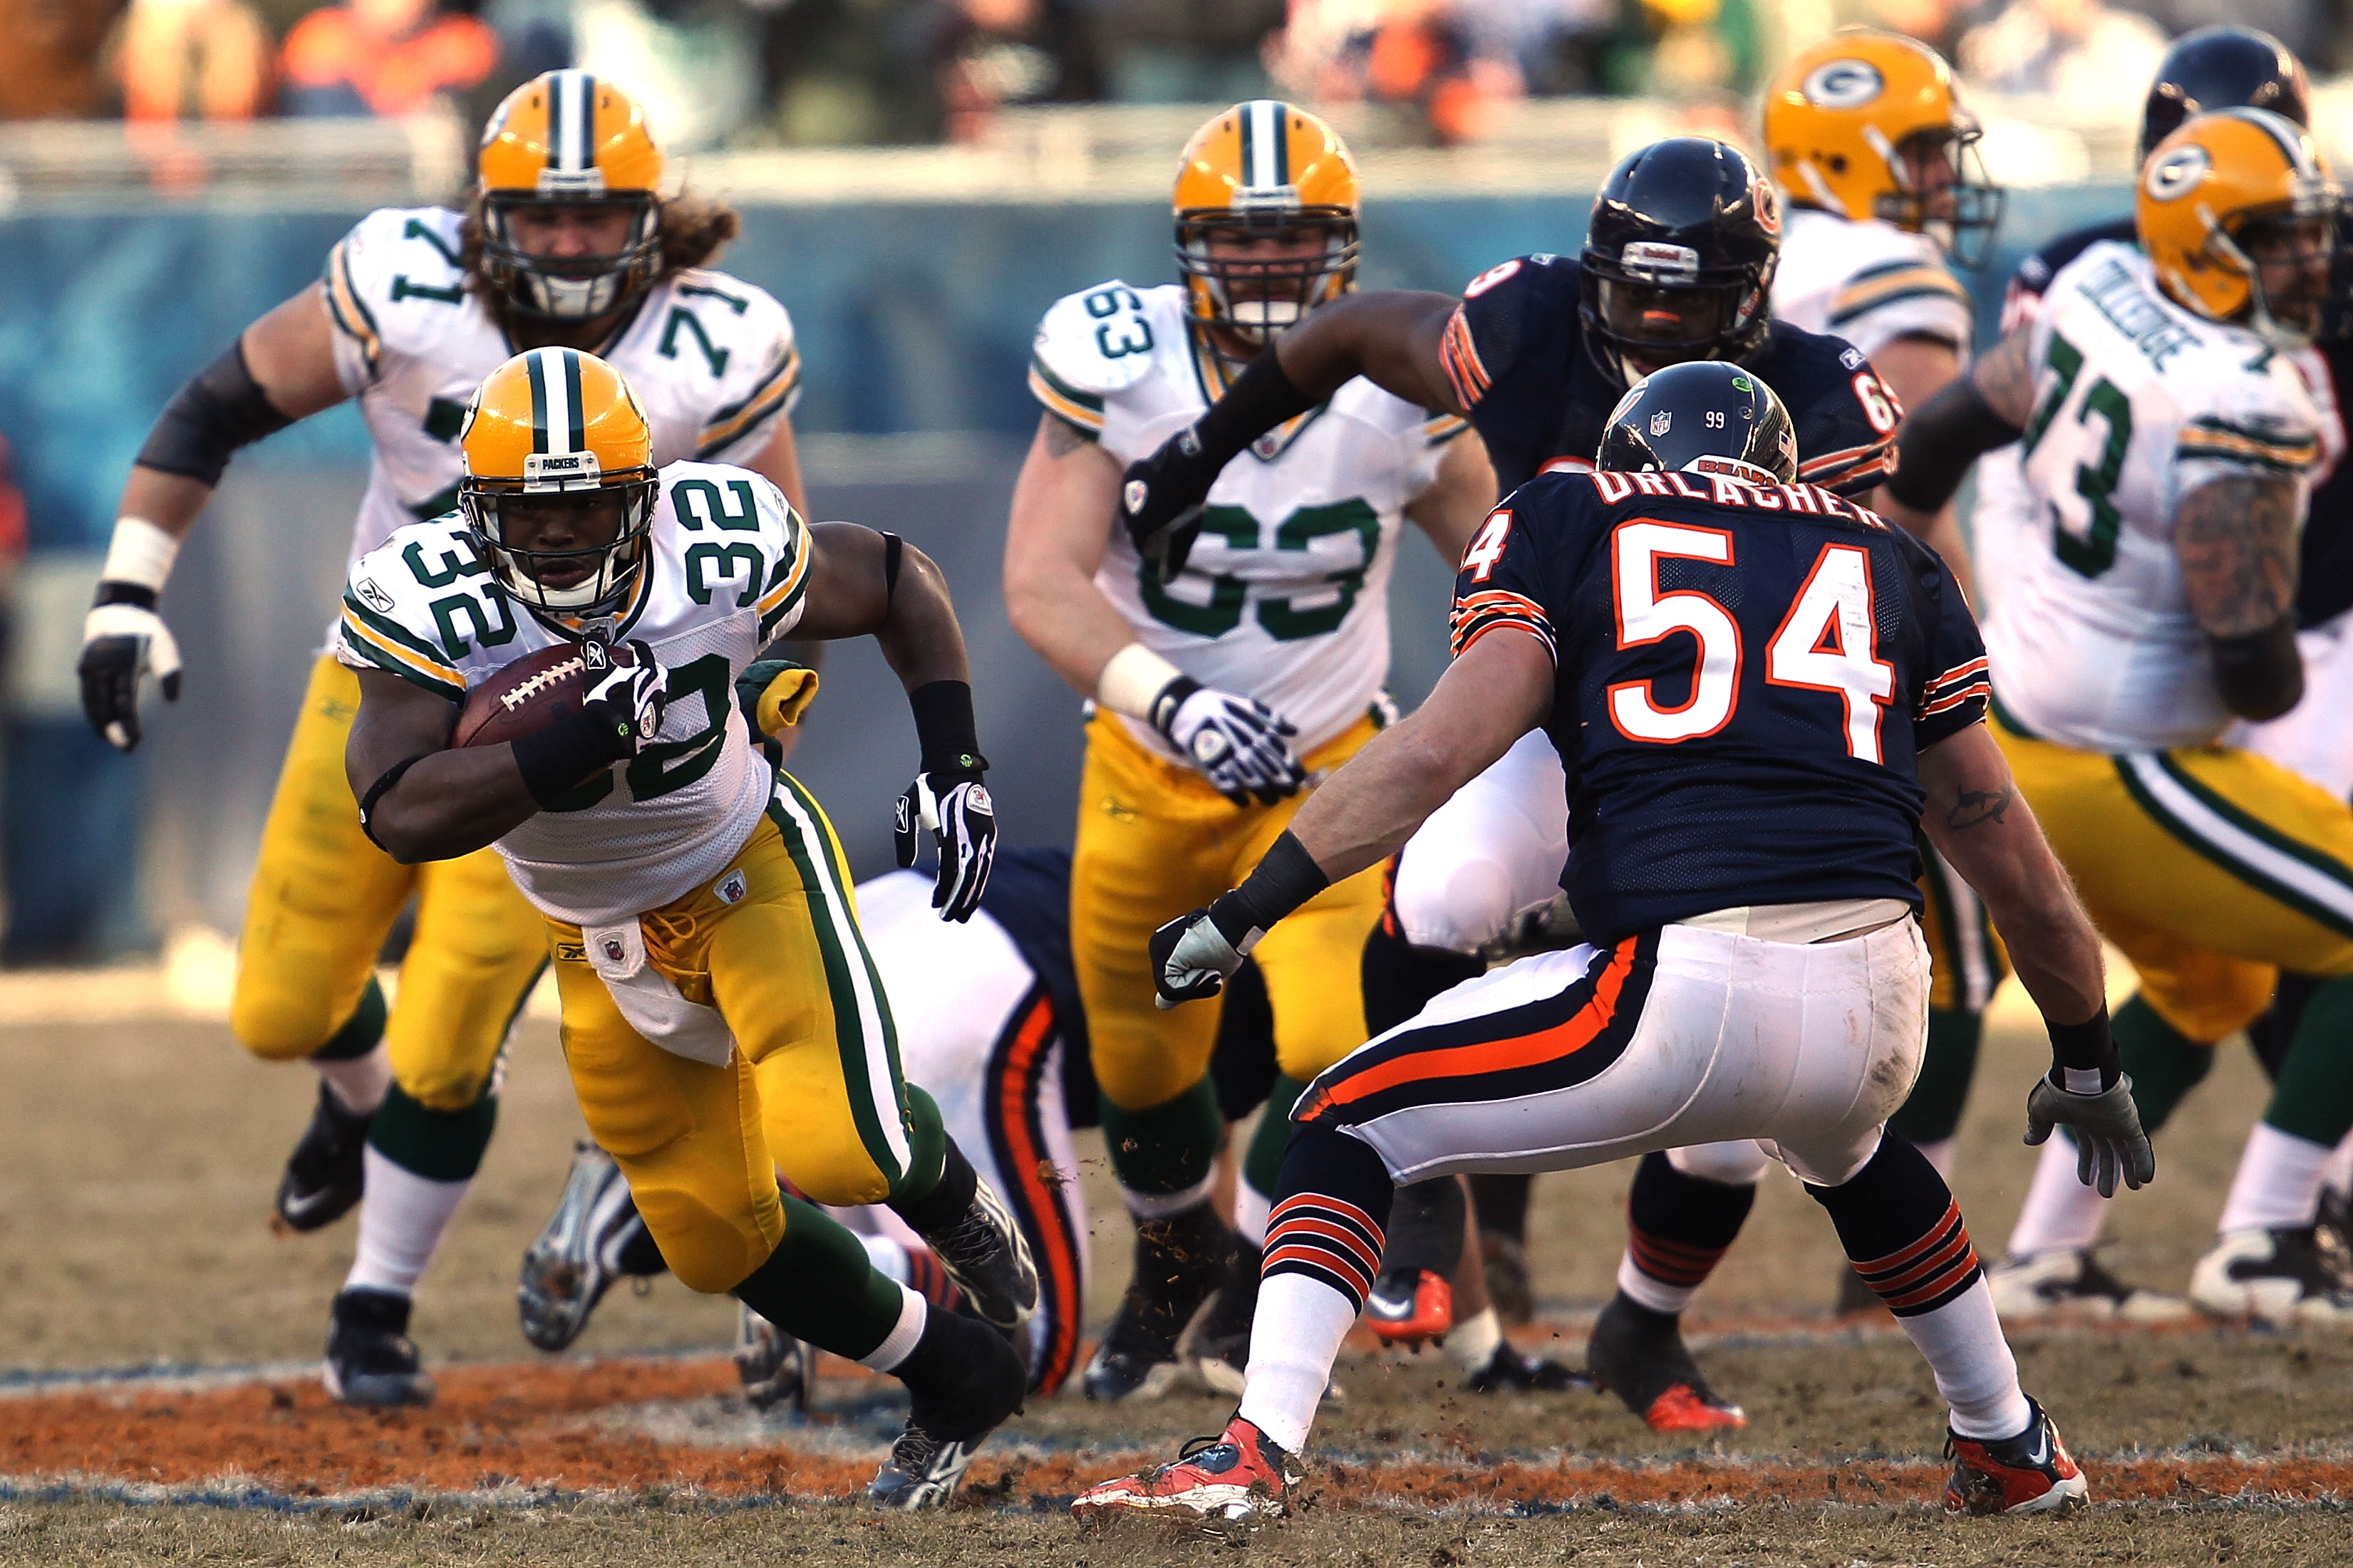 CHICAGO, IL - JANUARY 23:  Brandon Jackson #32 of the Green Bay Packers runs the ball against the Chicago Bears in the NFC Championship Game at Soldier Field on January 23, 2011 in Chicago, Illinois.  (Photo by Jonathan Daniel/Getty Images)